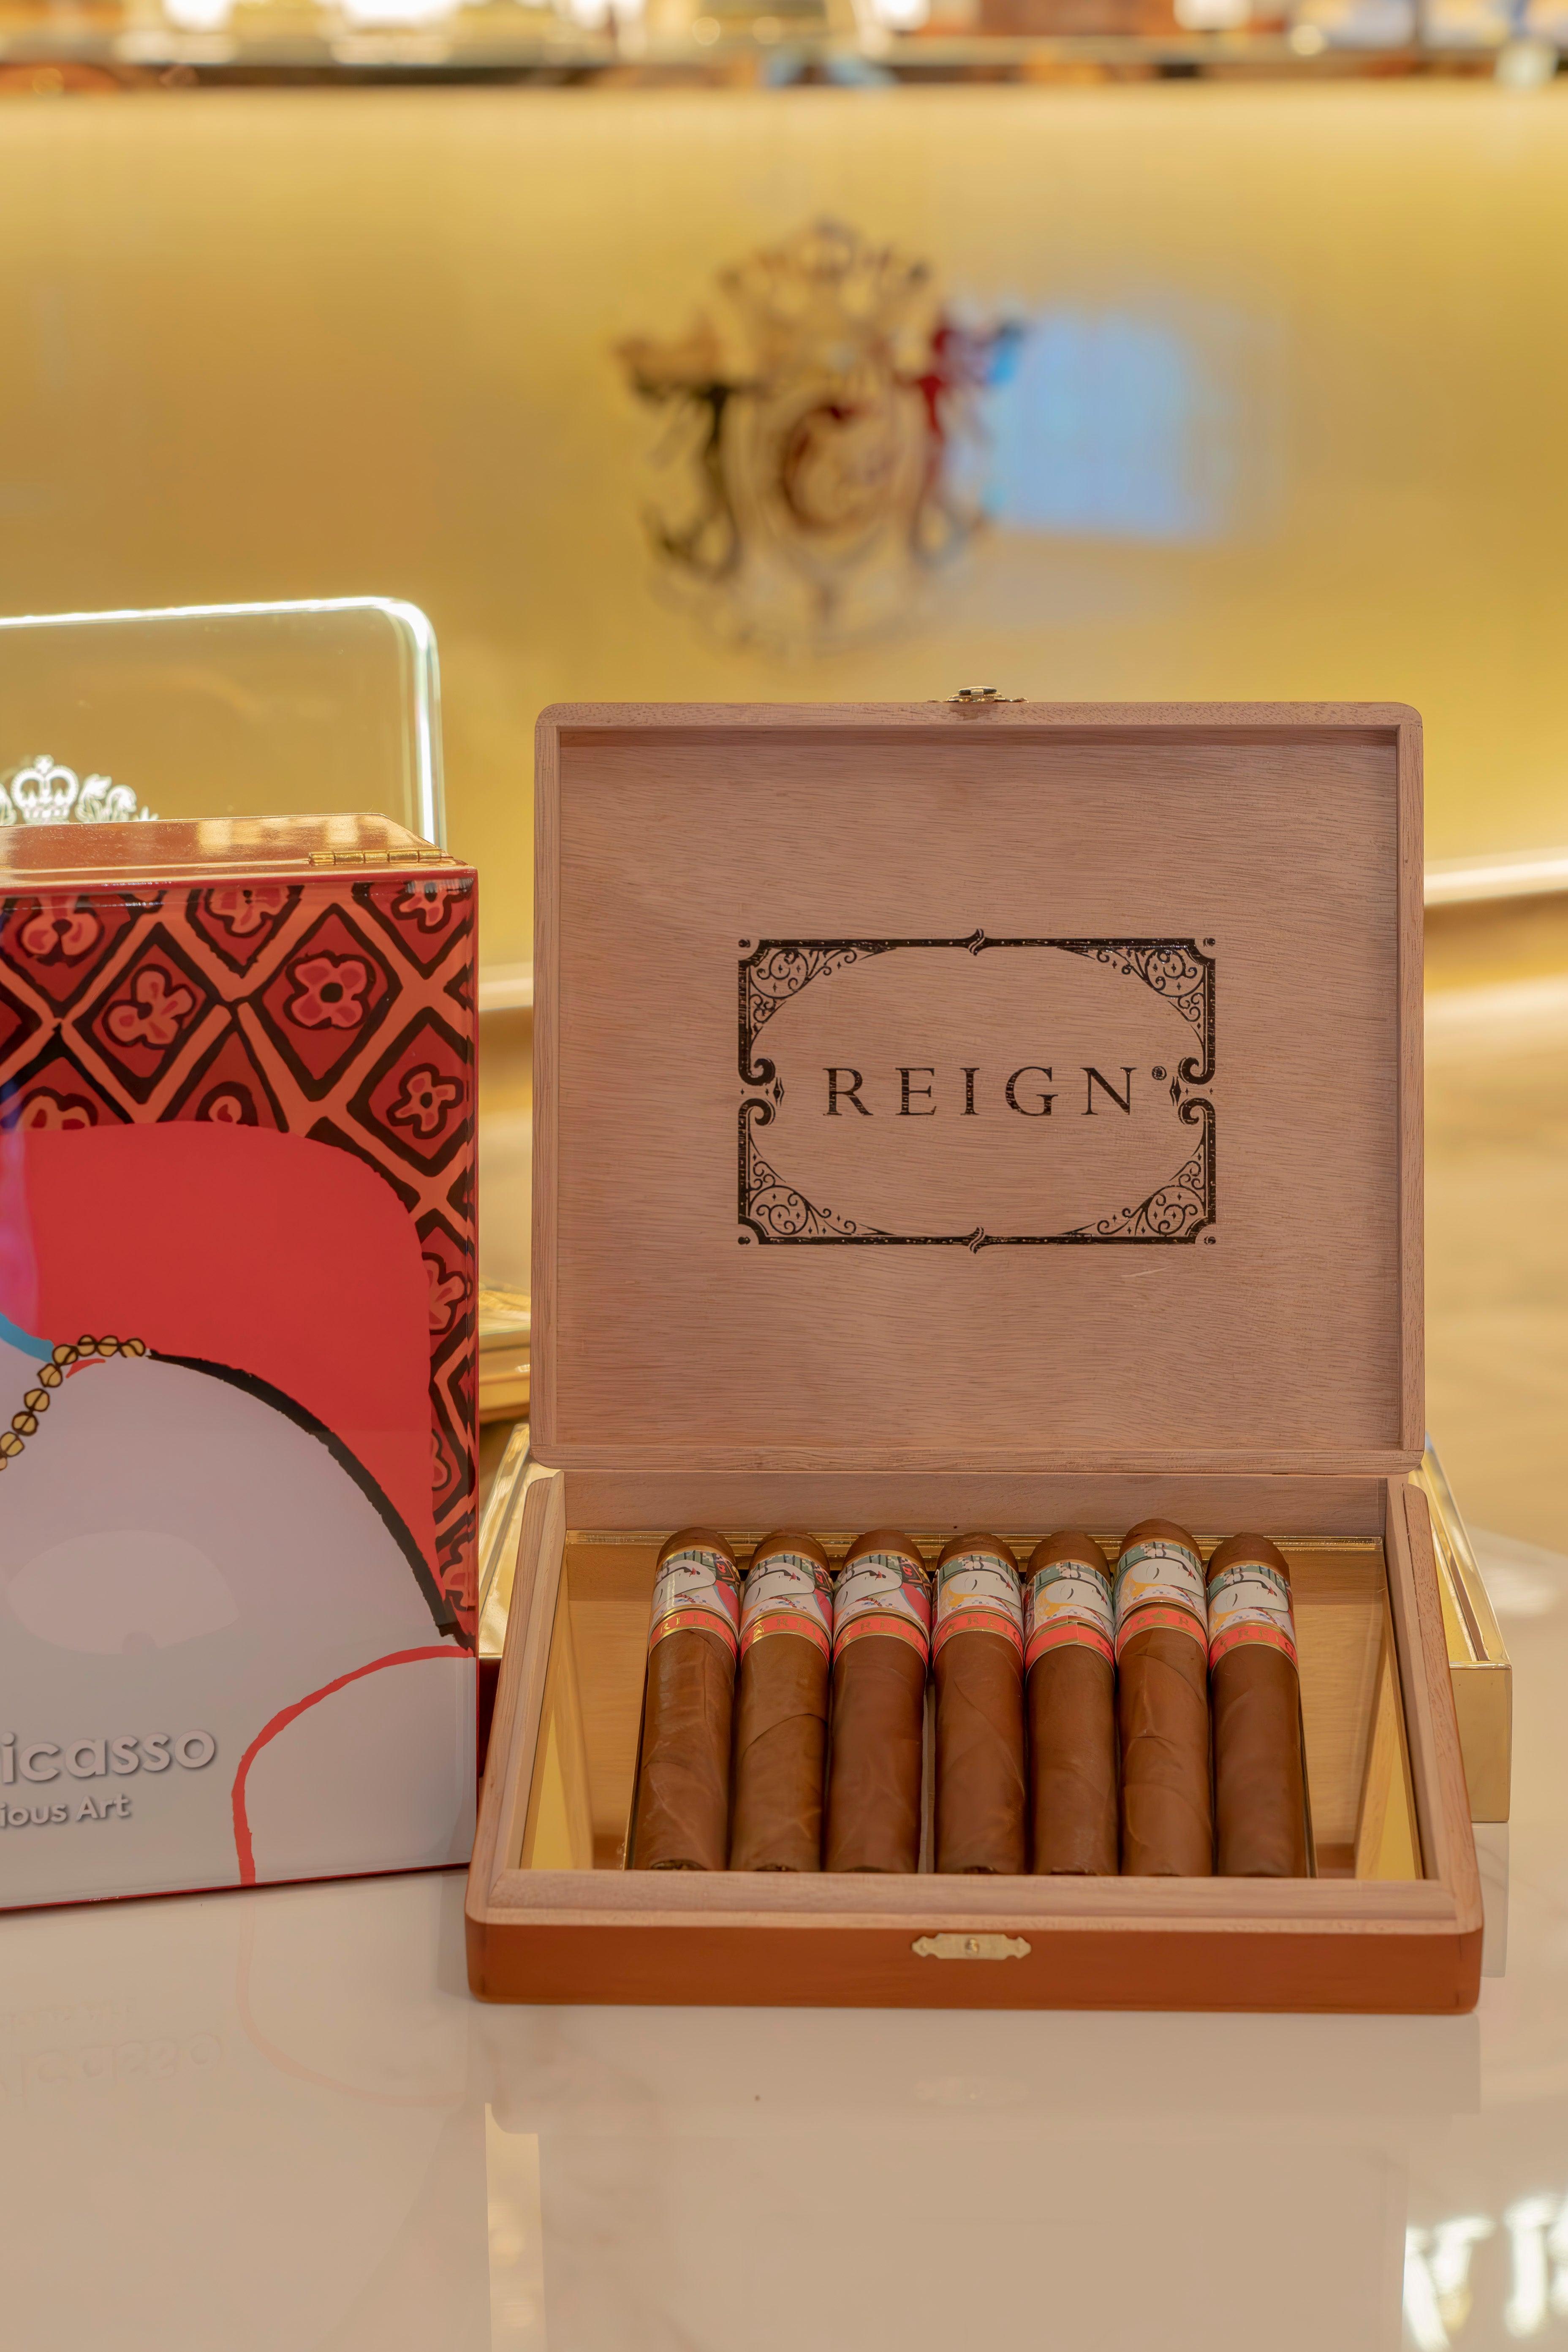 Picasso's Masterpiece: The Dream x Dominican Cigars Set - 7 Exquisite Pieces